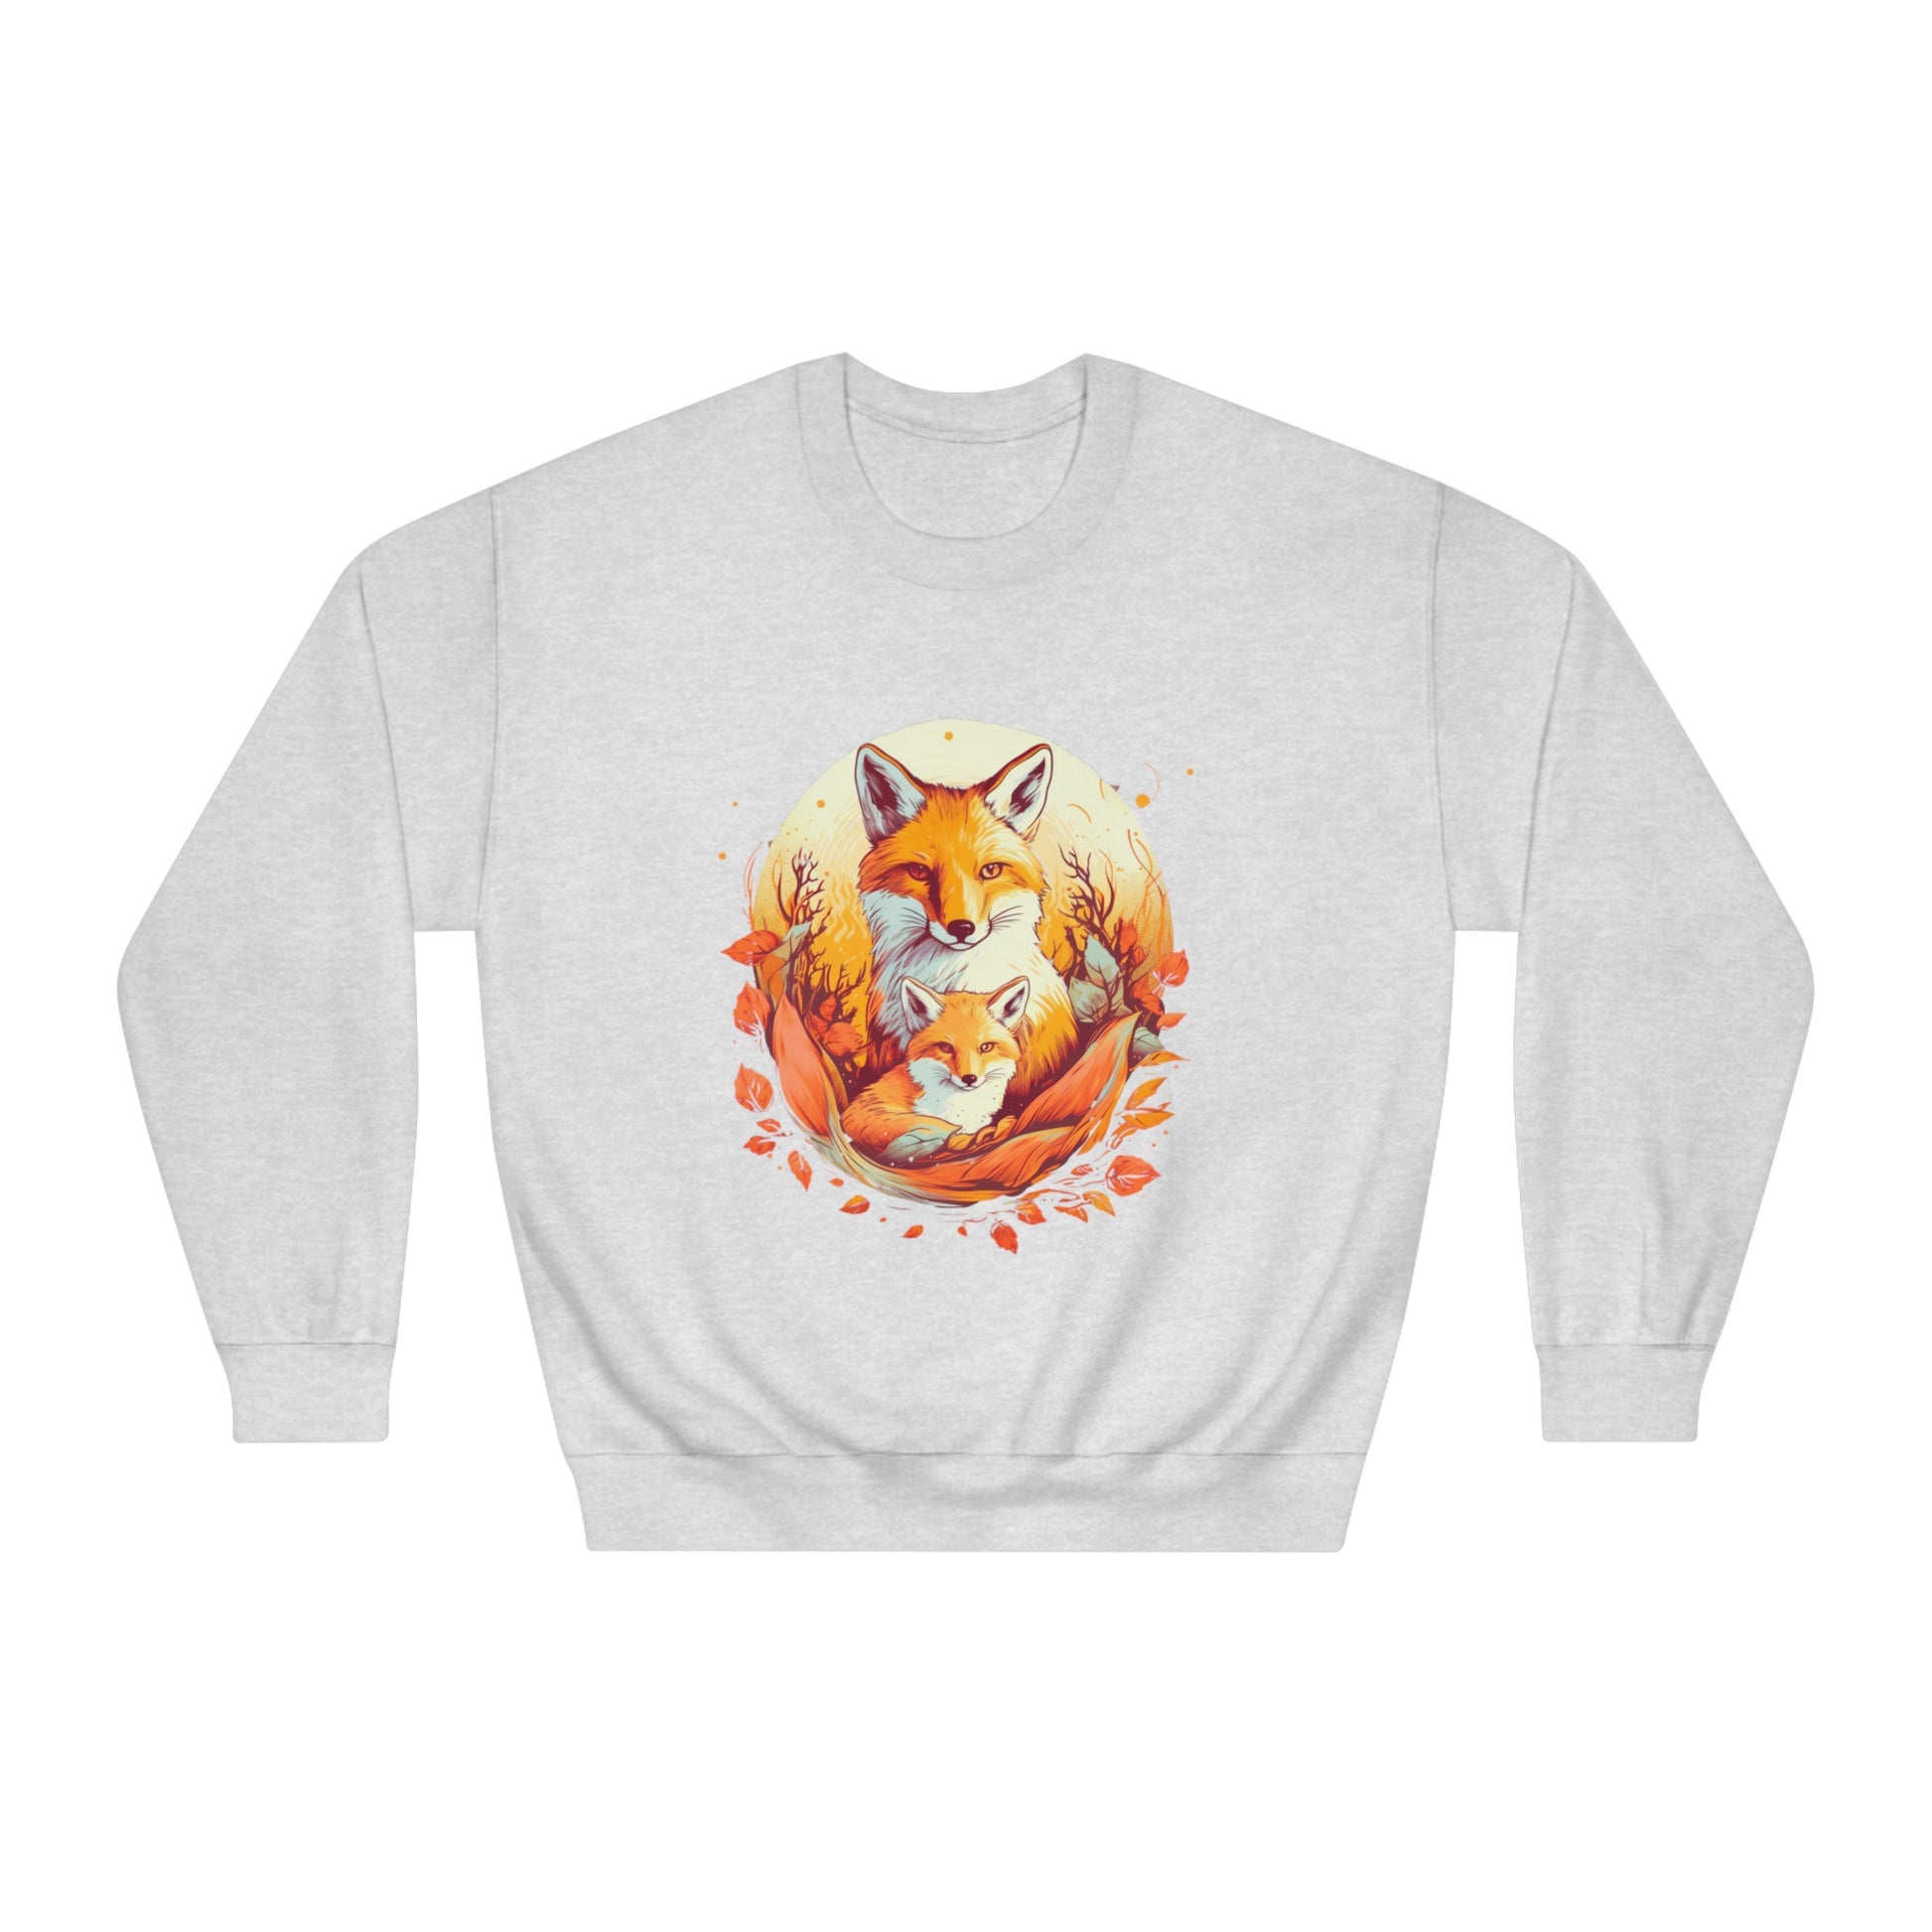 Cozy Cute Fox Cottagecore Sweatshirt | Vintage Forest Witch Aesthetic Sweater with Mommy and Baby Fox Design Sweatshirt Ash S 